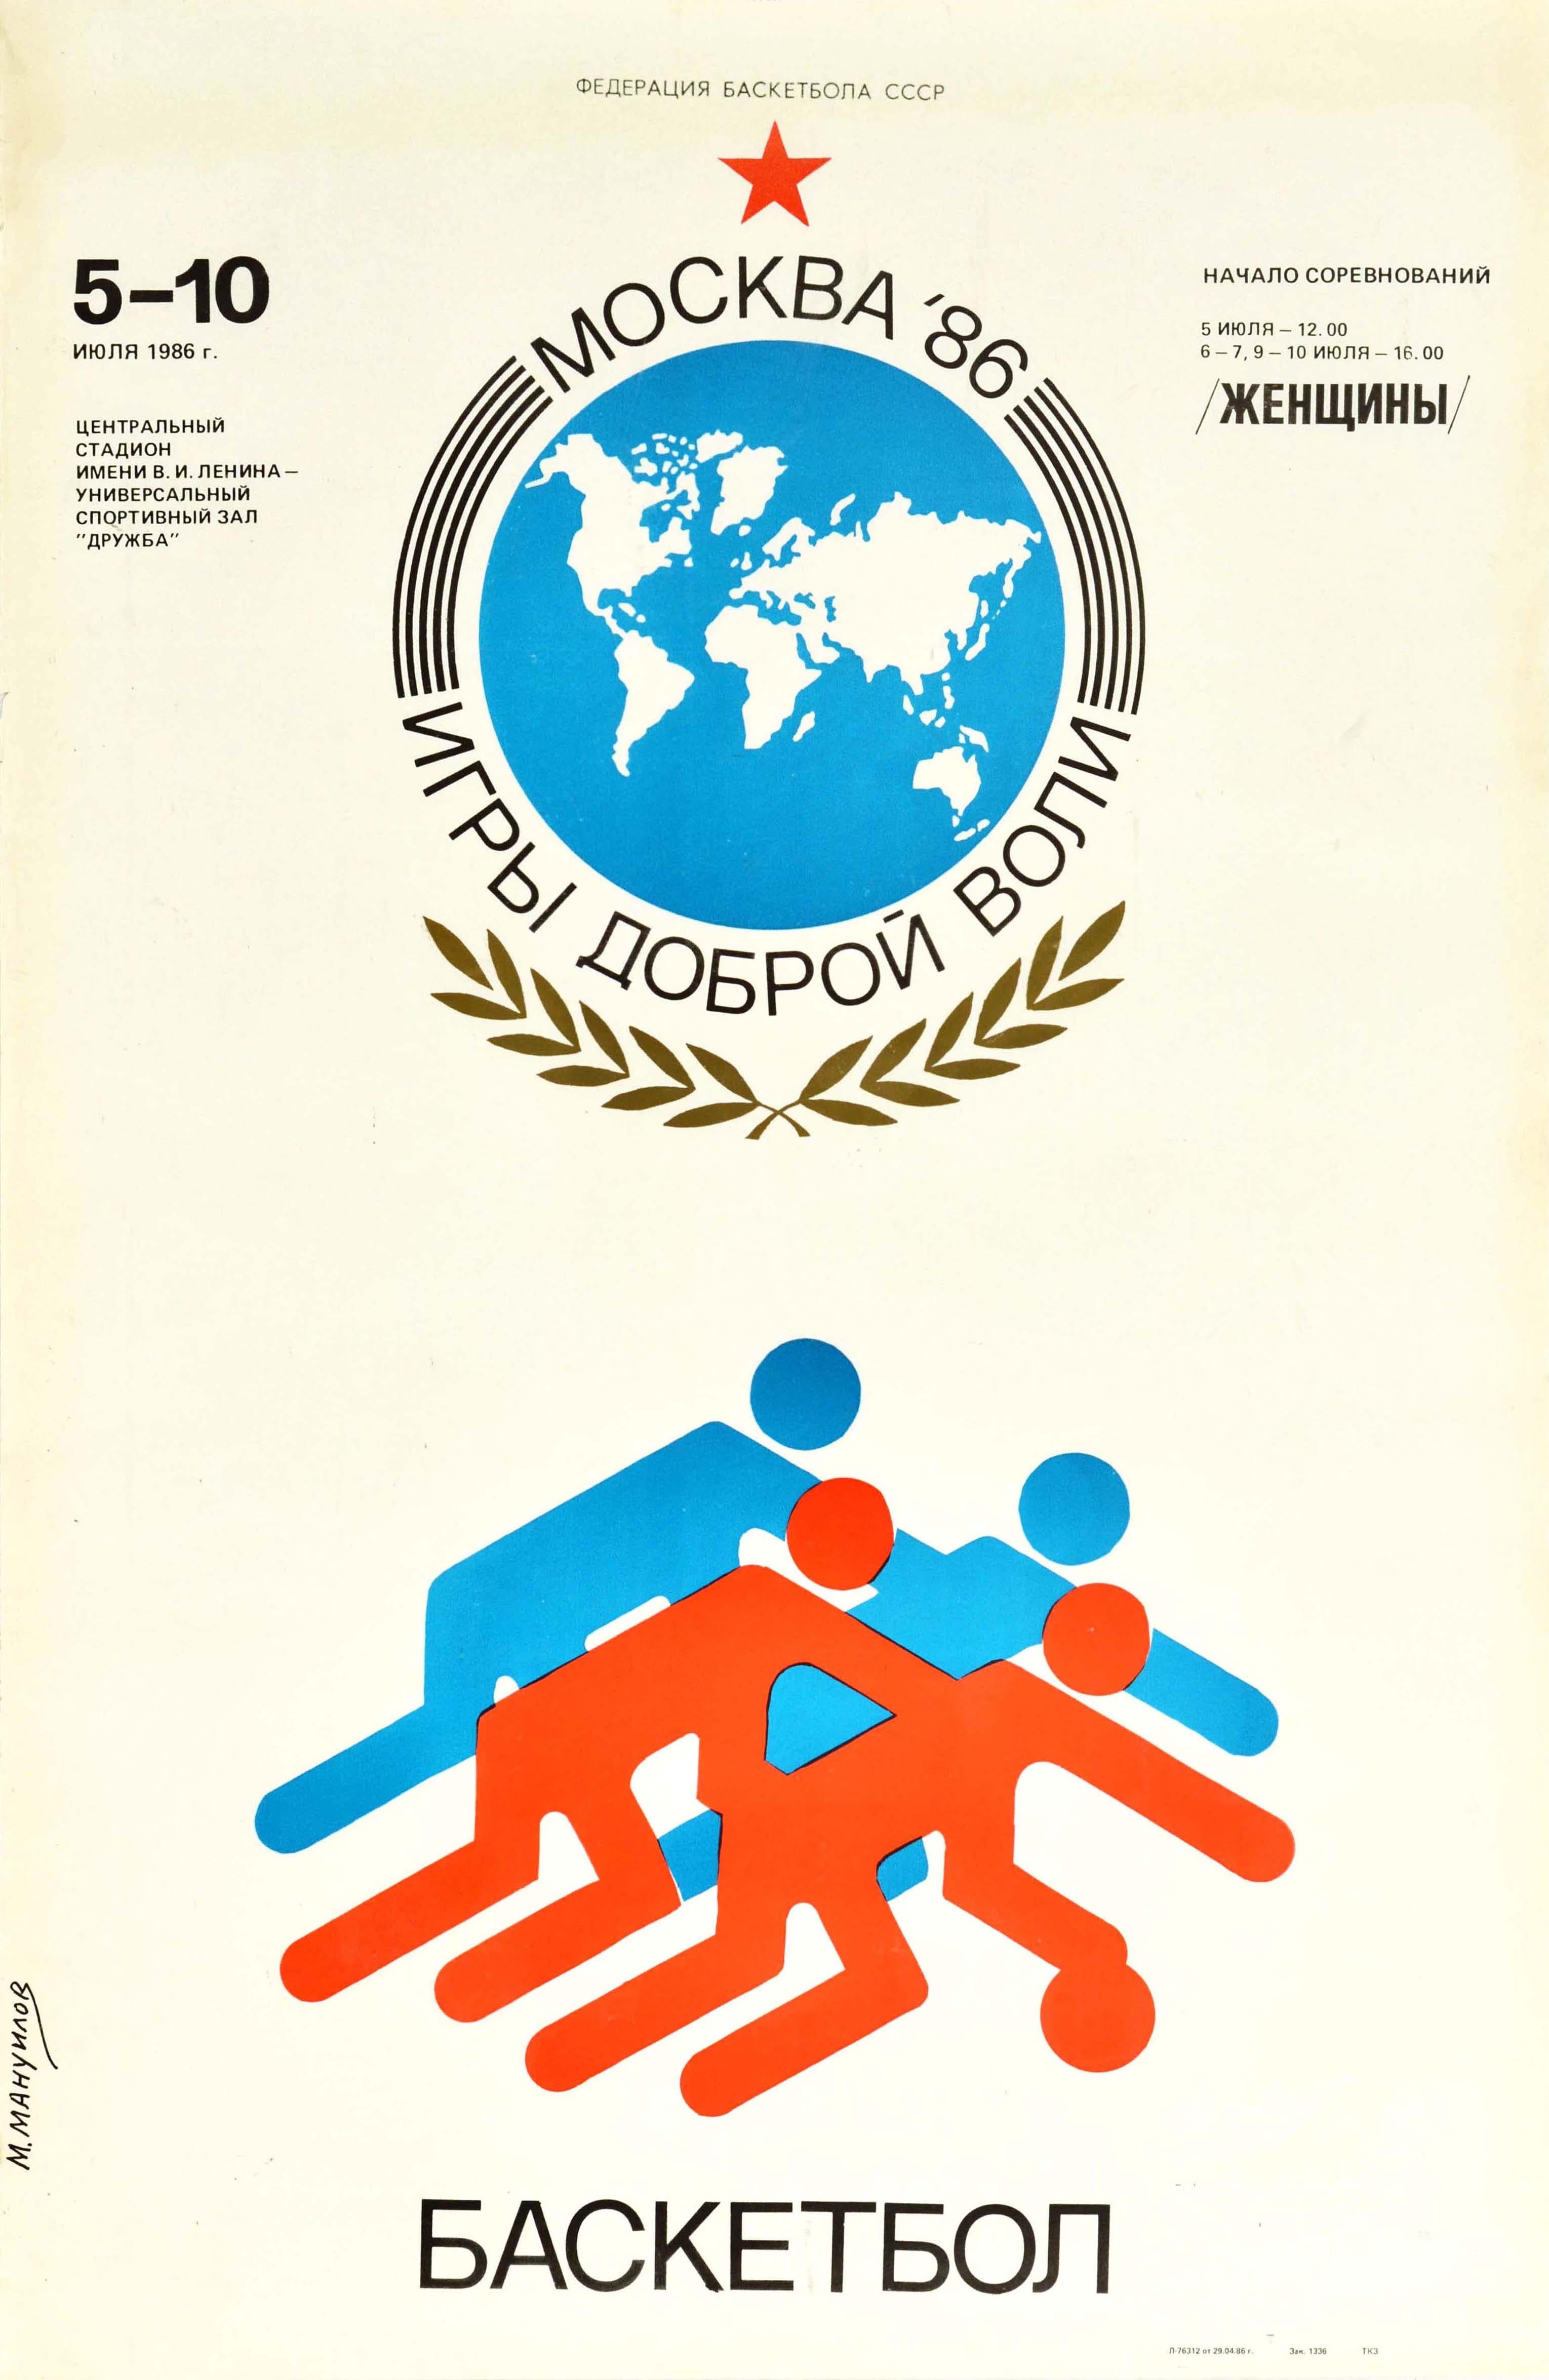 M. Manuilov Print - Original Vintage Sport Poster Basketball Women's Event Goodwill Games Moscow '86